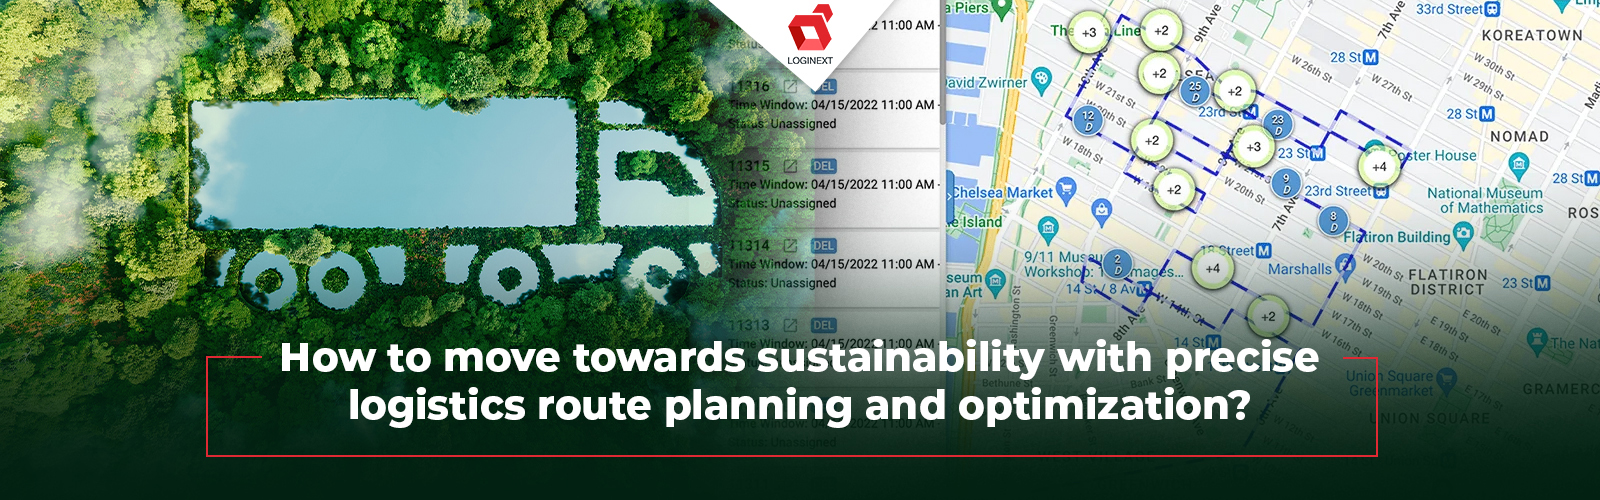 Achieve logistics sustainability with route planning and optimization